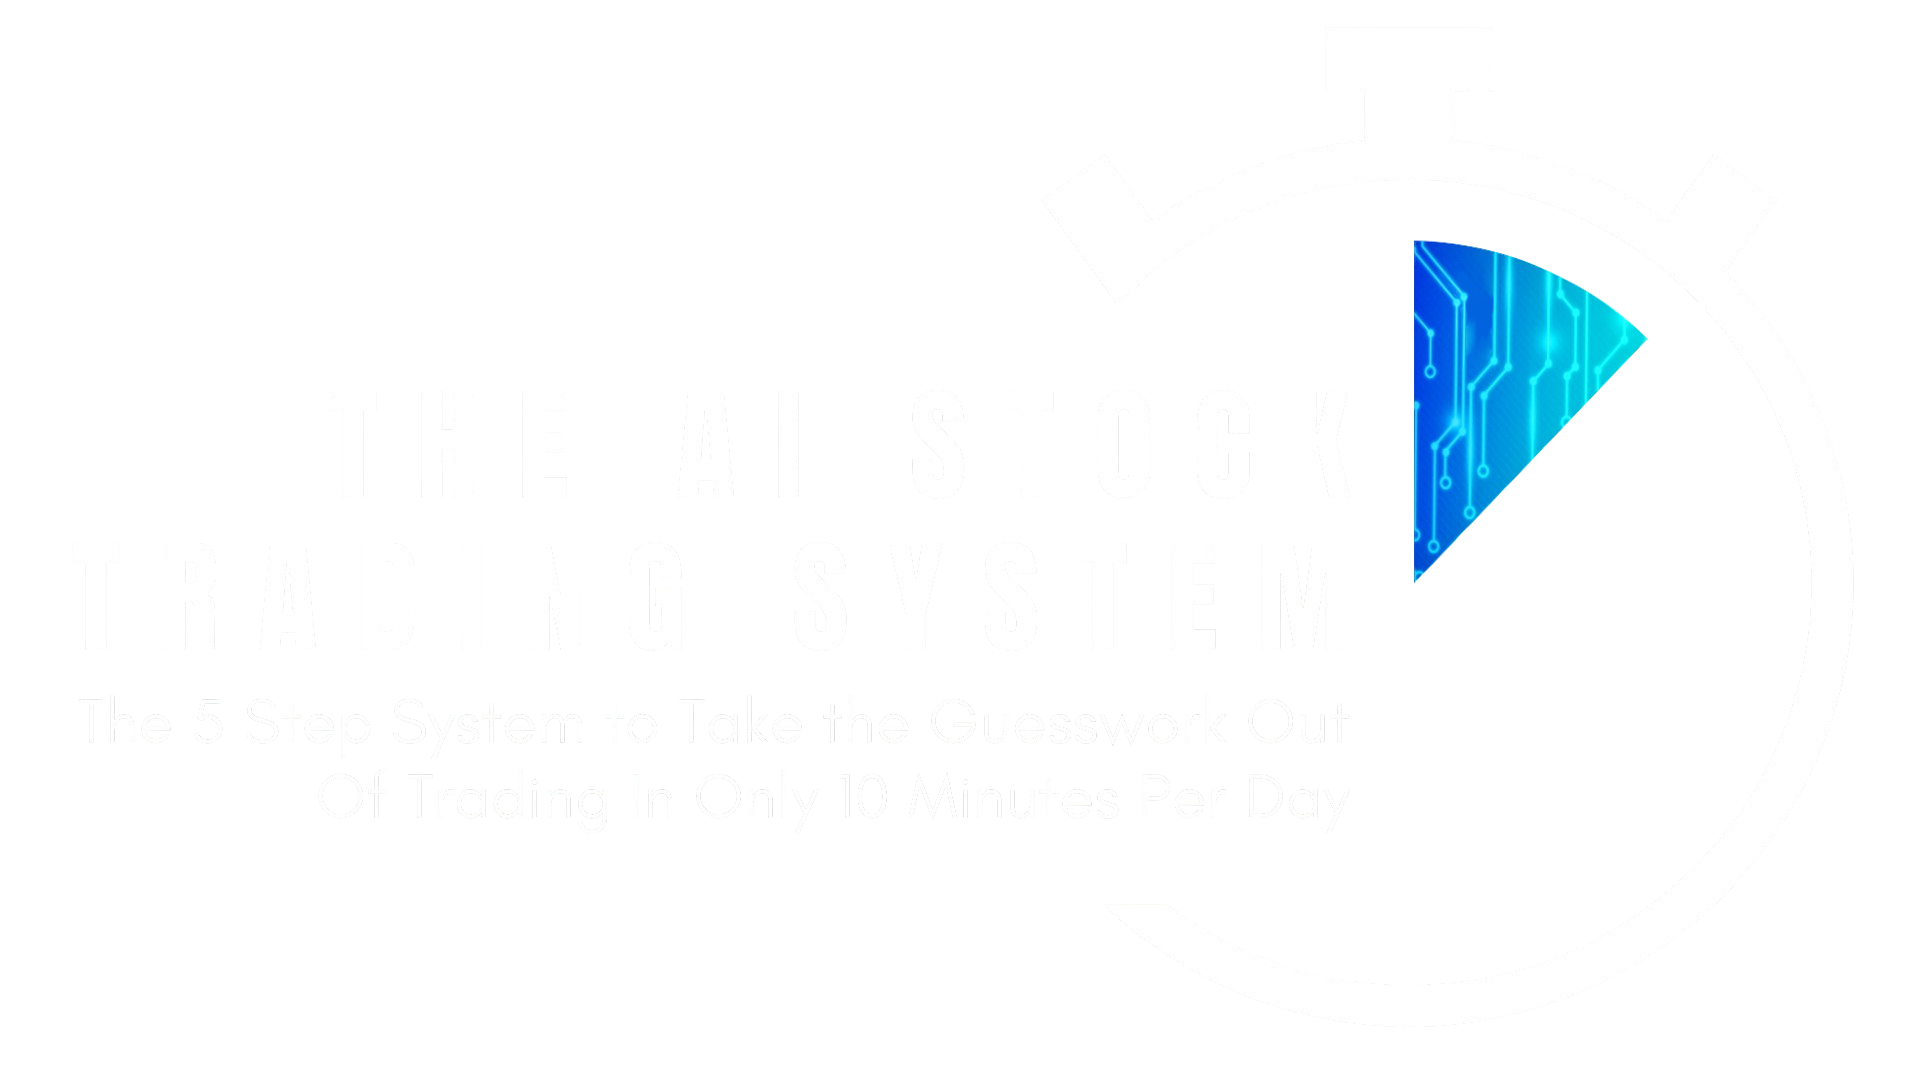 The AI Stock Trading System